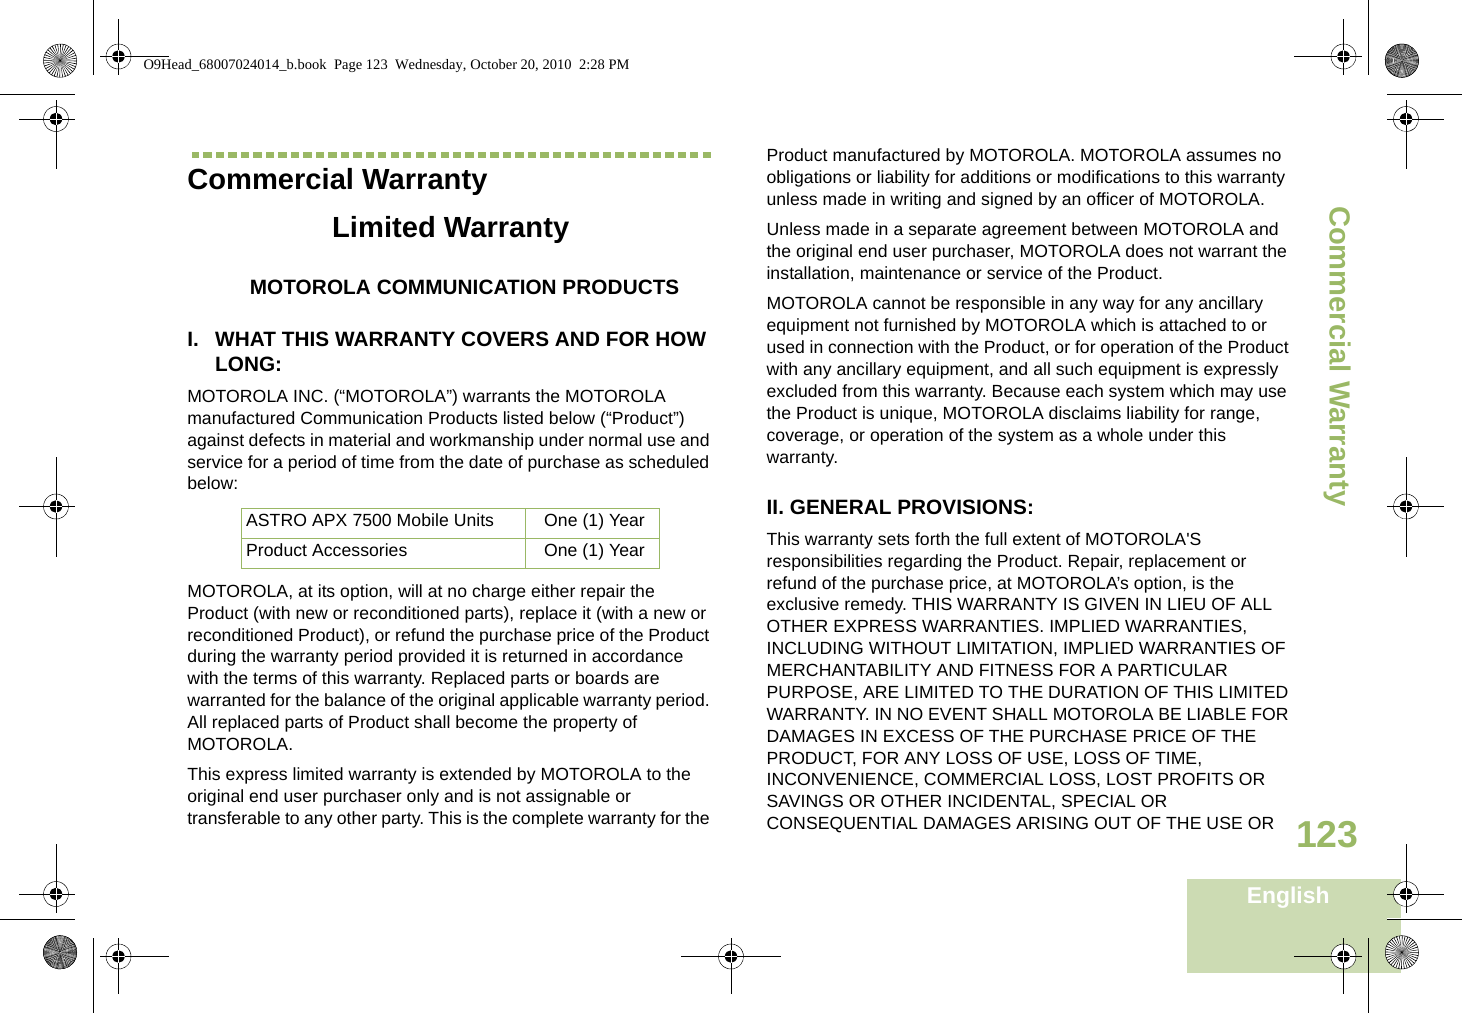 Commercial WarrantyEnglish123Commercial WarrantyLimited WarrantyMOTOROLA COMMUNICATION PRODUCTSI. WHAT THIS WARRANTY COVERS AND FOR HOW LONG:MOTOROLA INC. (“MOTOROLA”) warrants the MOTOROLA manufactured Communication Products listed below (“Product”) against defects in material and workmanship under normal use and service for a period of time from the date of purchase as scheduled below:MOTOROLA, at its option, will at no charge either repair the Product (with new or reconditioned parts), replace it (with a new or reconditioned Product), or refund the purchase price of the Product during the warranty period provided it is returned in accordance with the terms of this warranty. Replaced parts or boards are warranted for the balance of the original applicable warranty period. All replaced parts of Product shall become the property of MOTOROLA.This express limited warranty is extended by MOTOROLA to the original end user purchaser only and is not assignable or transferable to any other party. This is the complete warranty for the Product manufactured by MOTOROLA. MOTOROLA assumes no obligations or liability for additions or modifications to this warranty unless made in writing and signed by an officer of MOTOROLA. Unless made in a separate agreement between MOTOROLA and the original end user purchaser, MOTOROLA does not warrant the installation, maintenance or service of the Product.MOTOROLA cannot be responsible in any way for any ancillary equipment not furnished by MOTOROLA which is attached to or used in connection with the Product, or for operation of the Product with any ancillary equipment, and all such equipment is expressly excluded from this warranty. Because each system which may use the Product is unique, MOTOROLA disclaims liability for range, coverage, or operation of the system as a whole under this warranty.II. GENERAL PROVISIONS:This warranty sets forth the full extent of MOTOROLA&apos;S responsibilities regarding the Product. Repair, replacement or refund of the purchase price, at MOTOROLA’s option, is the exclusive remedy. THIS WARRANTY IS GIVEN IN LIEU OF ALL OTHER EXPRESS WARRANTIES. IMPLIED WARRANTIES, INCLUDING WITHOUT LIMITATION, IMPLIED WARRANTIES OF MERCHANTABILITY AND FITNESS FOR A PARTICULAR PURPOSE, ARE LIMITED TO THE DURATION OF THIS LIMITED WARRANTY. IN NO EVENT SHALL MOTOROLA BE LIABLE FOR DAMAGES IN EXCESS OF THE PURCHASE PRICE OF THE PRODUCT, FOR ANY LOSS OF USE, LOSS OF TIME, INCONVENIENCE, COMMERCIAL LOSS, LOST PROFITS OR SAVINGS OR OTHER INCIDENTAL, SPECIAL OR CONSEQUENTIAL DAMAGES ARISING OUT OF THE USE OR ASTRO APX 7500 Mobile Units One (1) YearProduct Accessories One (1) YearO9Head_68007024014_b.book  Page 123  Wednesday, October 20, 2010  2:28 PM